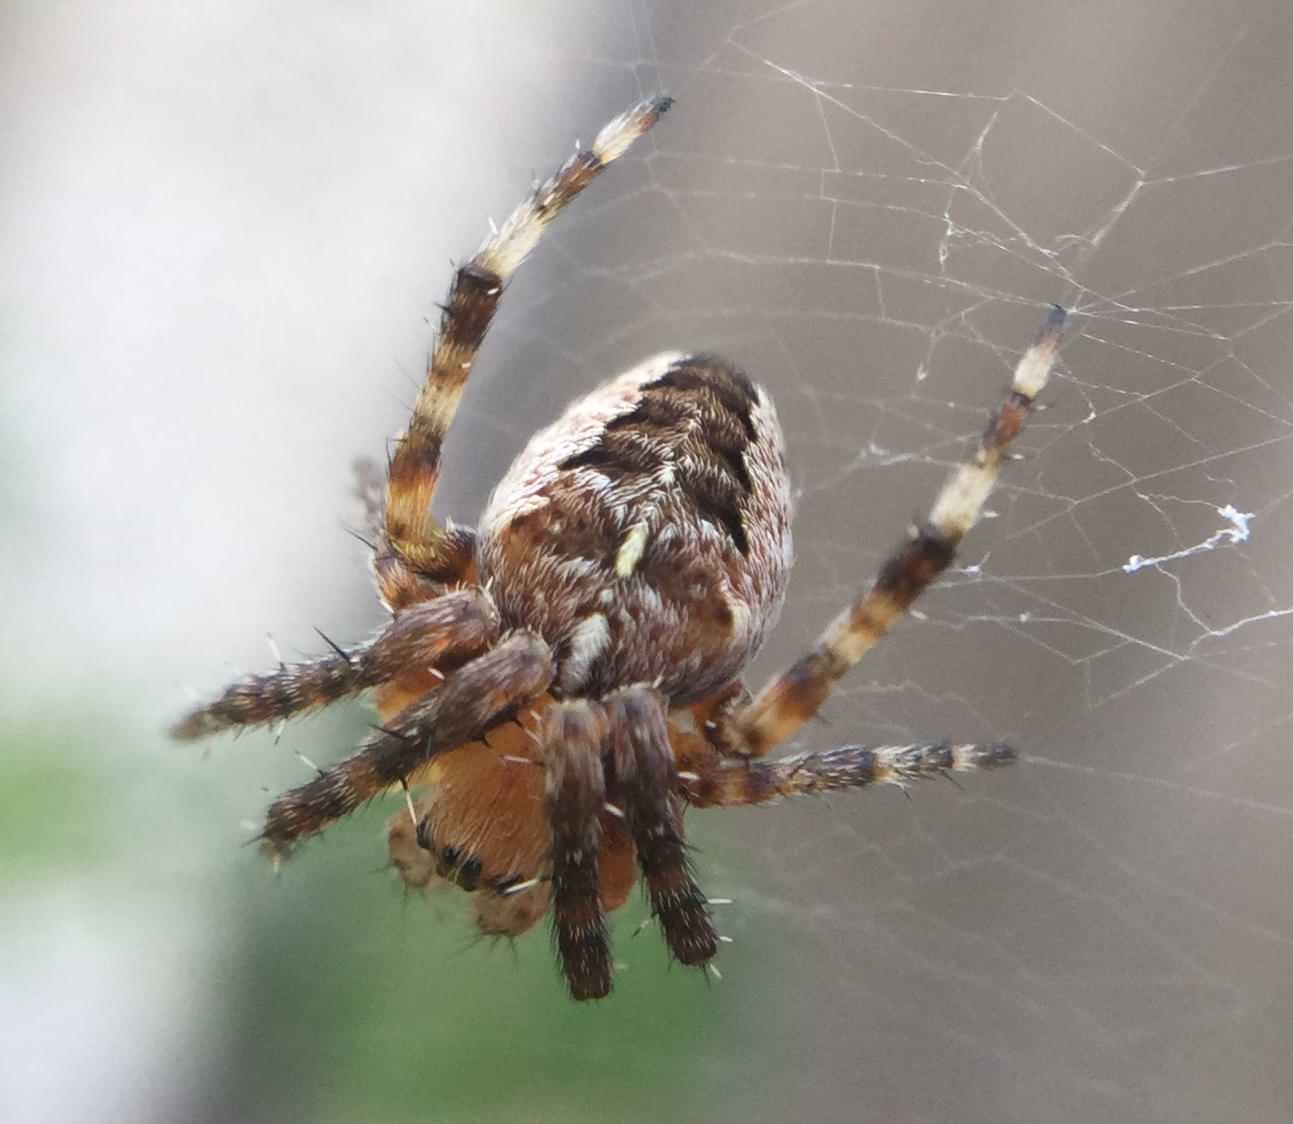 A small spider on a frayed web. It's body is covered in white and black fur with small patches of orange.